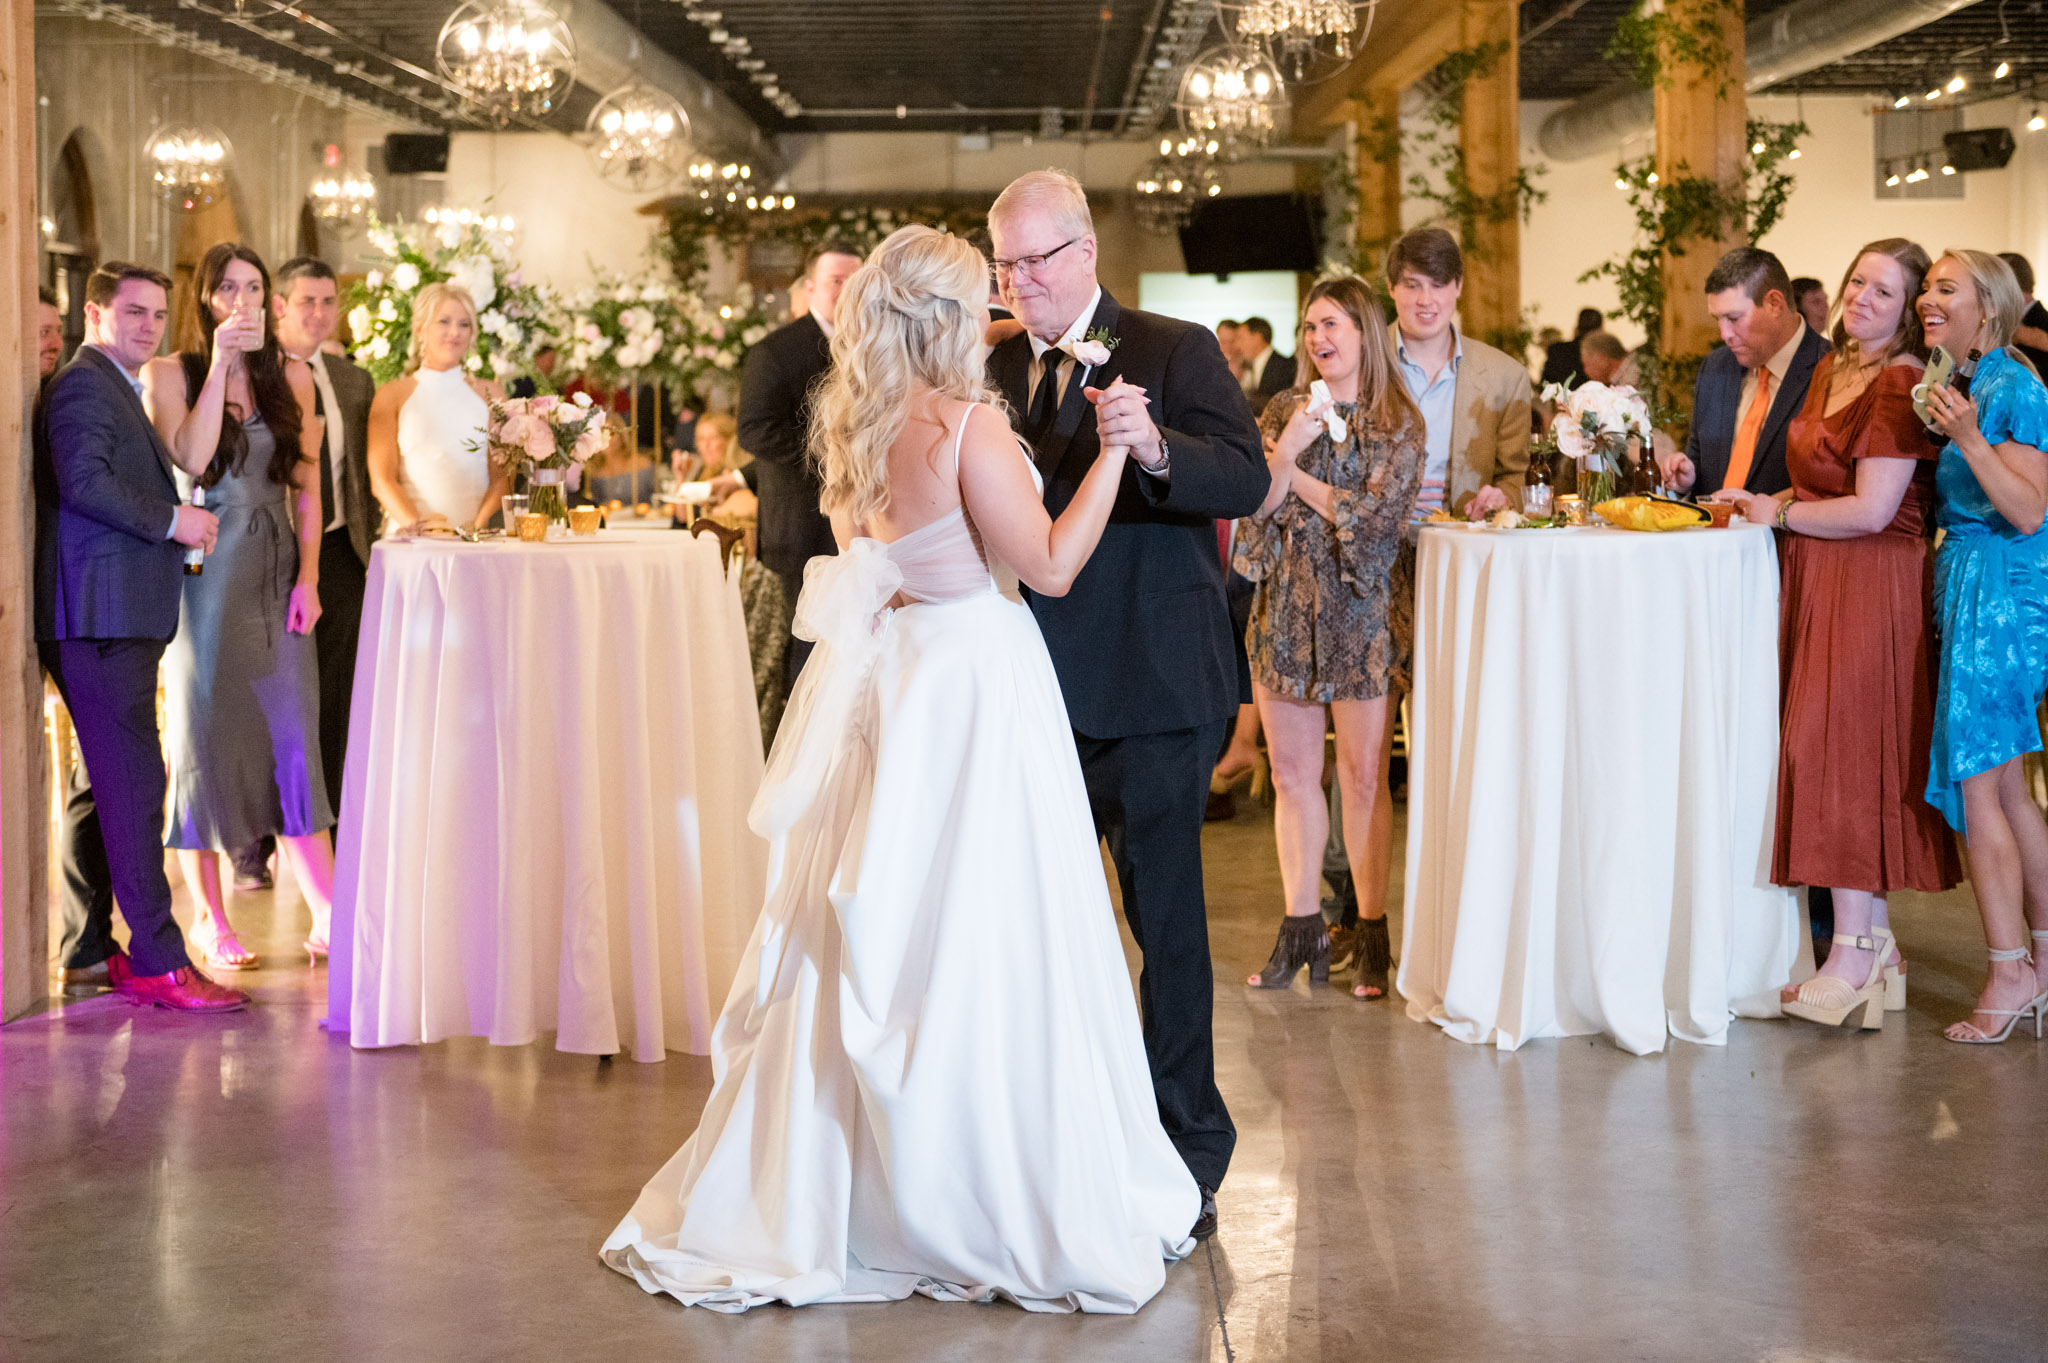 Bride dances with father.